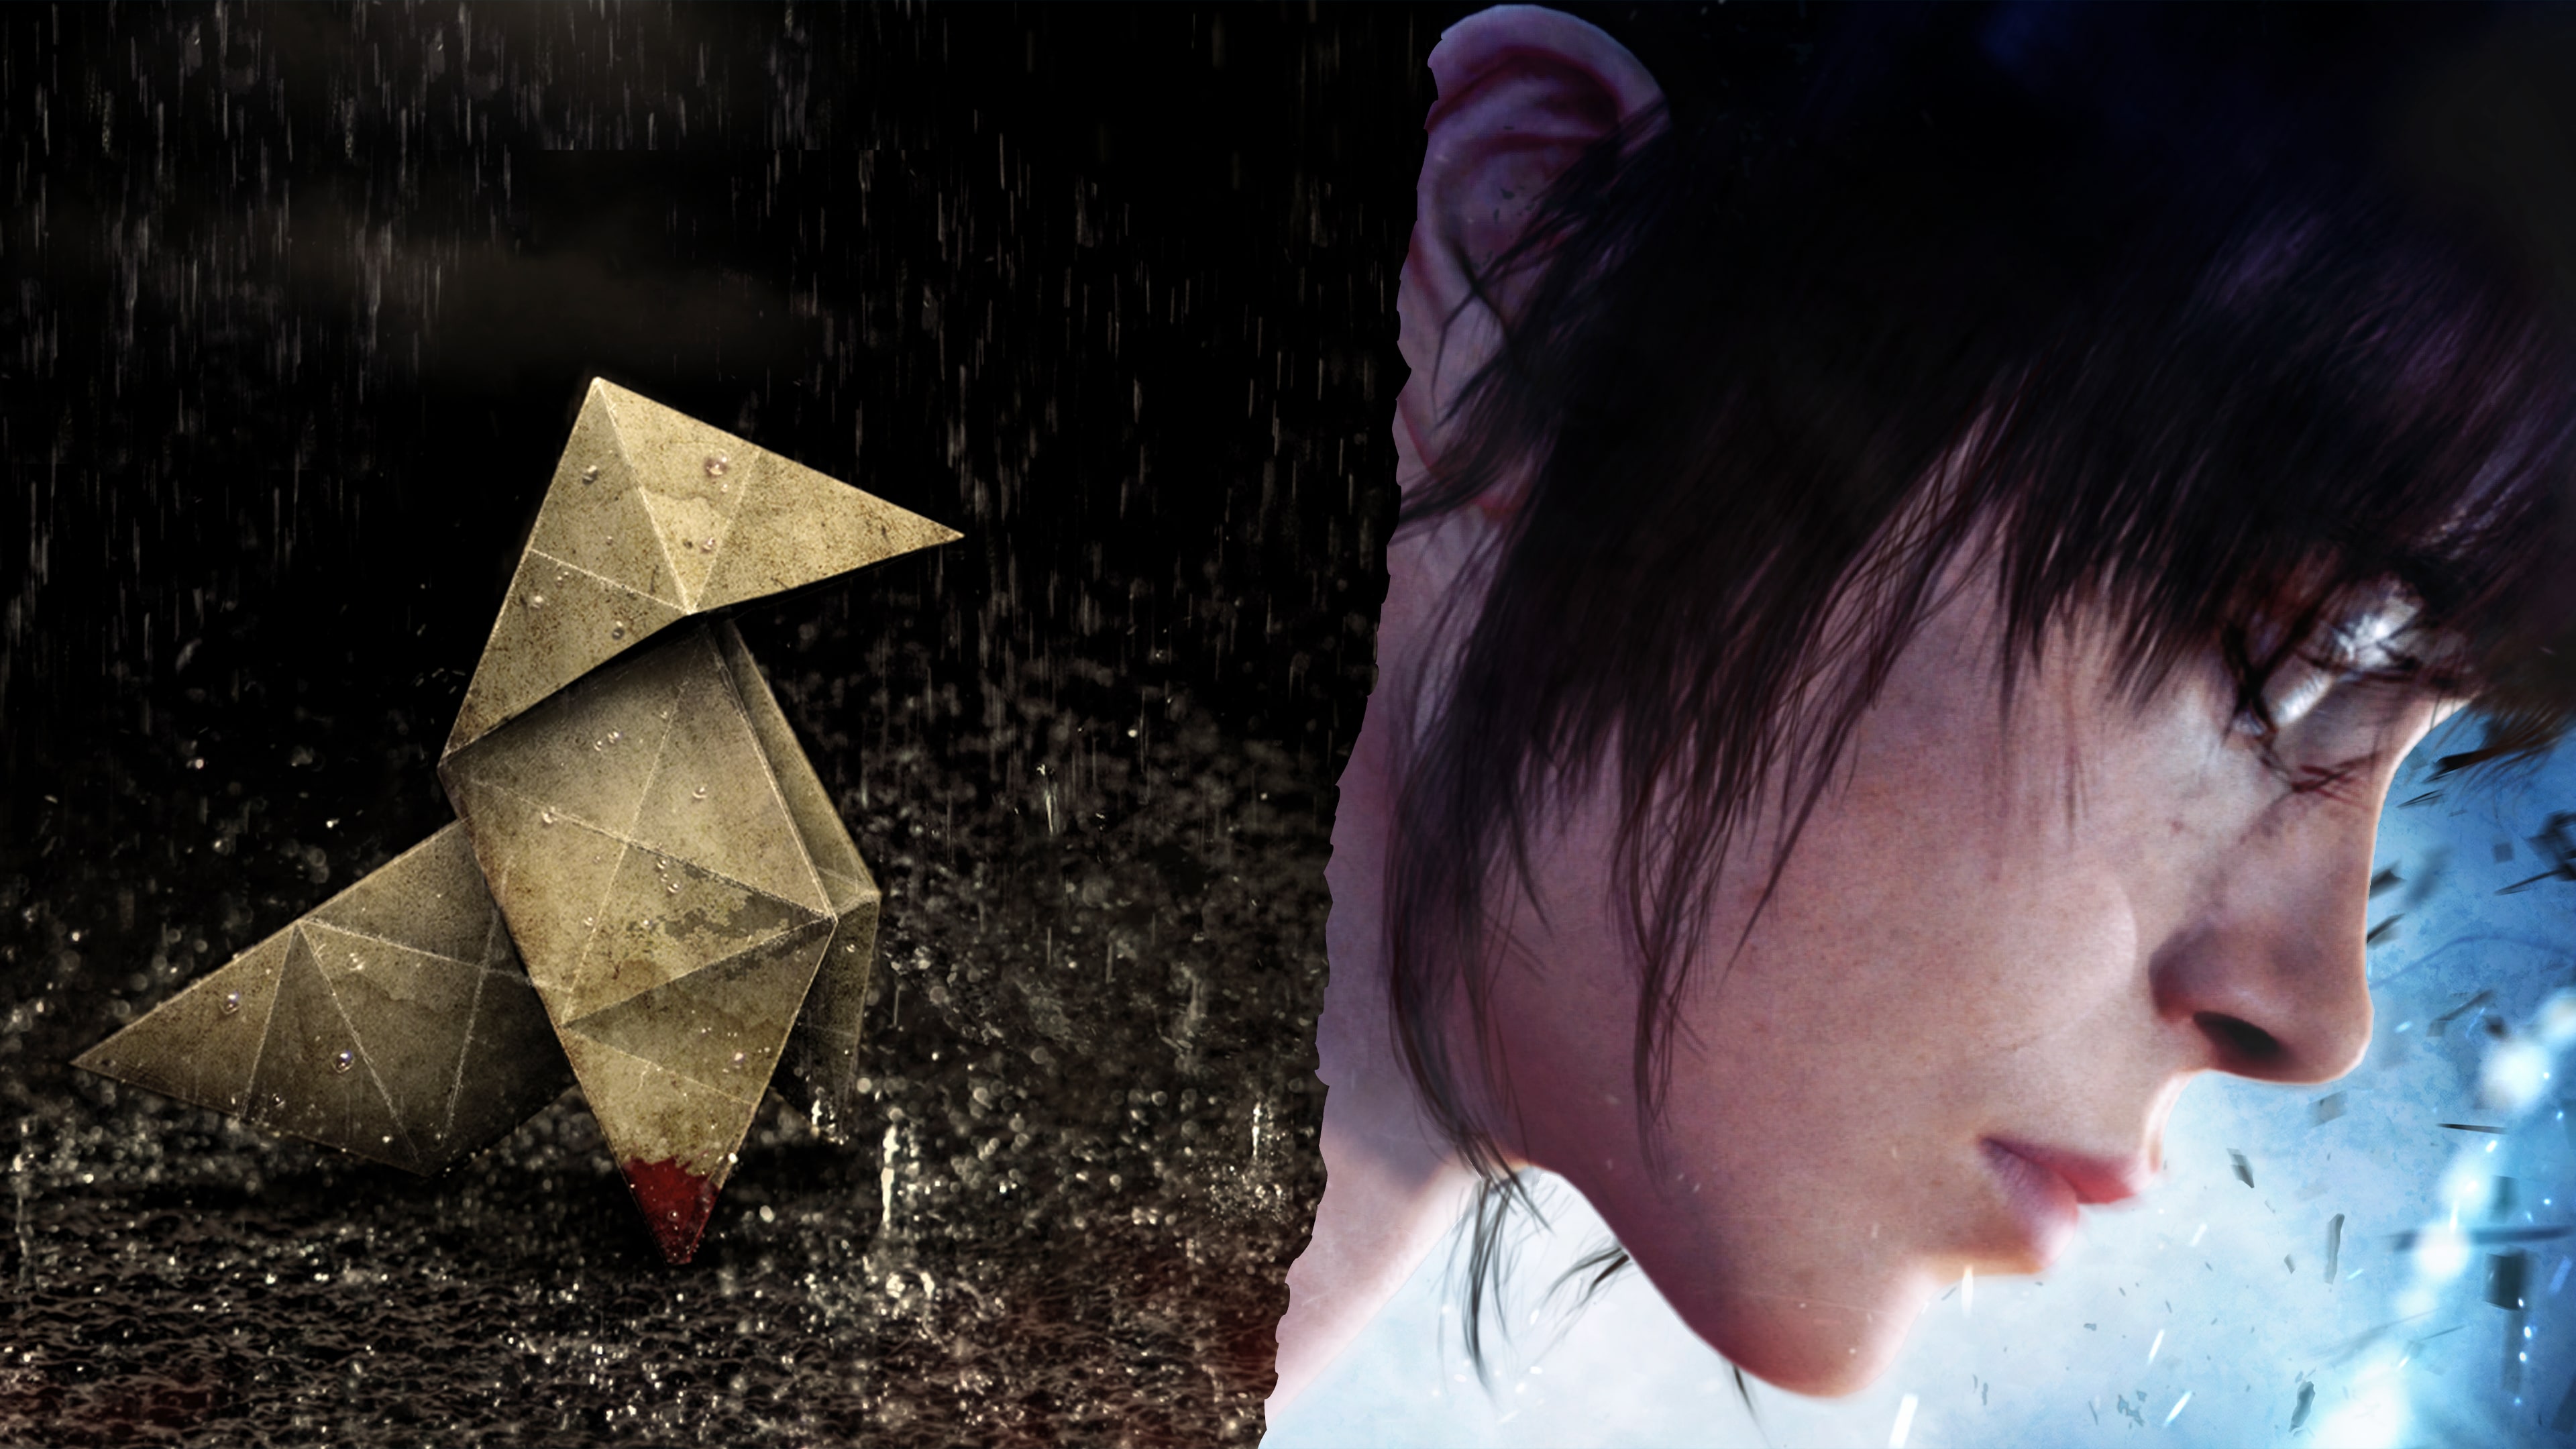 HEAVY RAIN™ -心の軋むとき- & BEYOND: Two Souls™ Collection